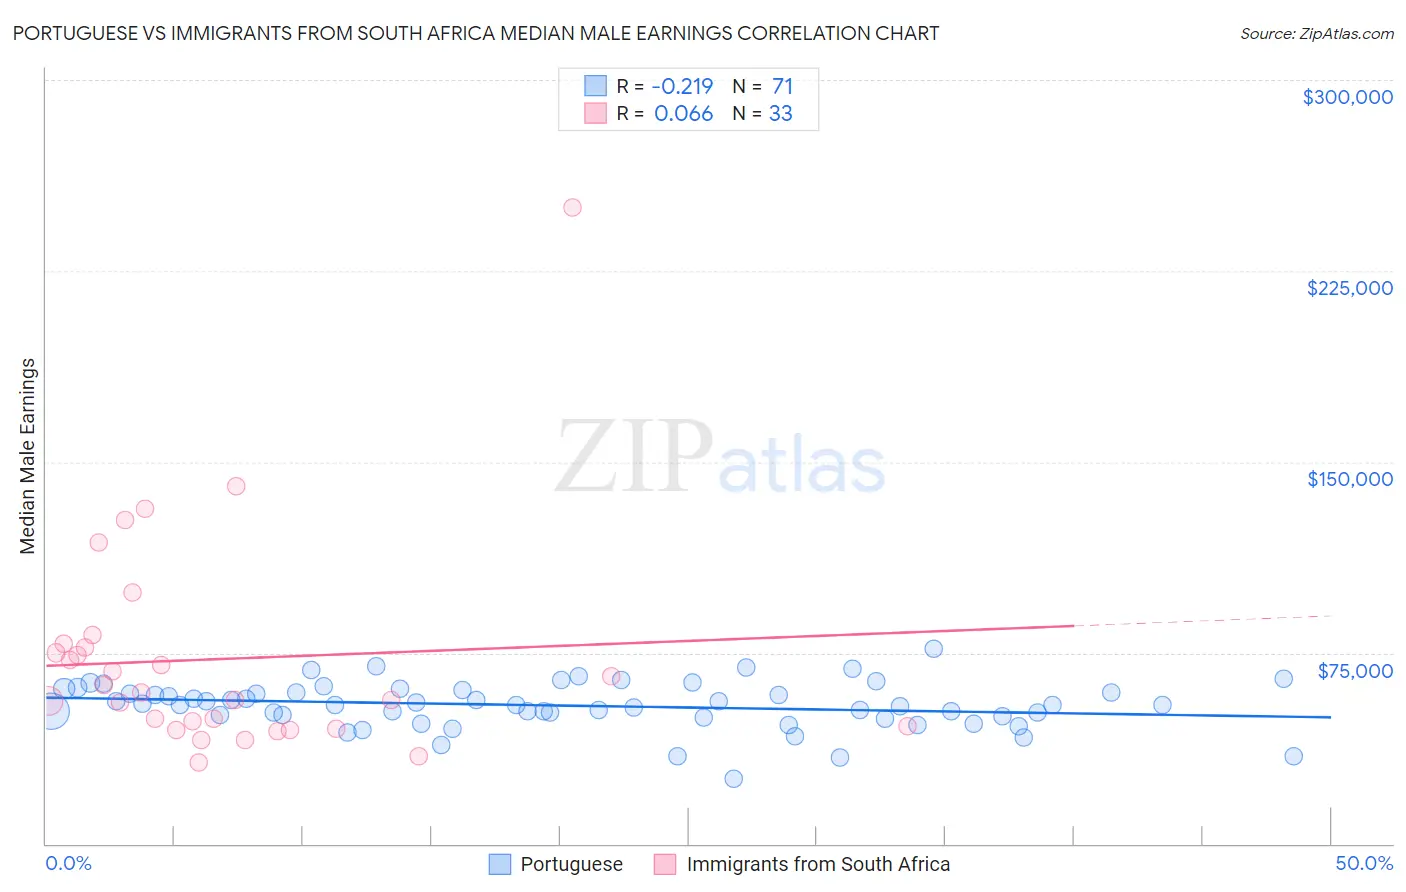 Portuguese vs Immigrants from South Africa Median Male Earnings